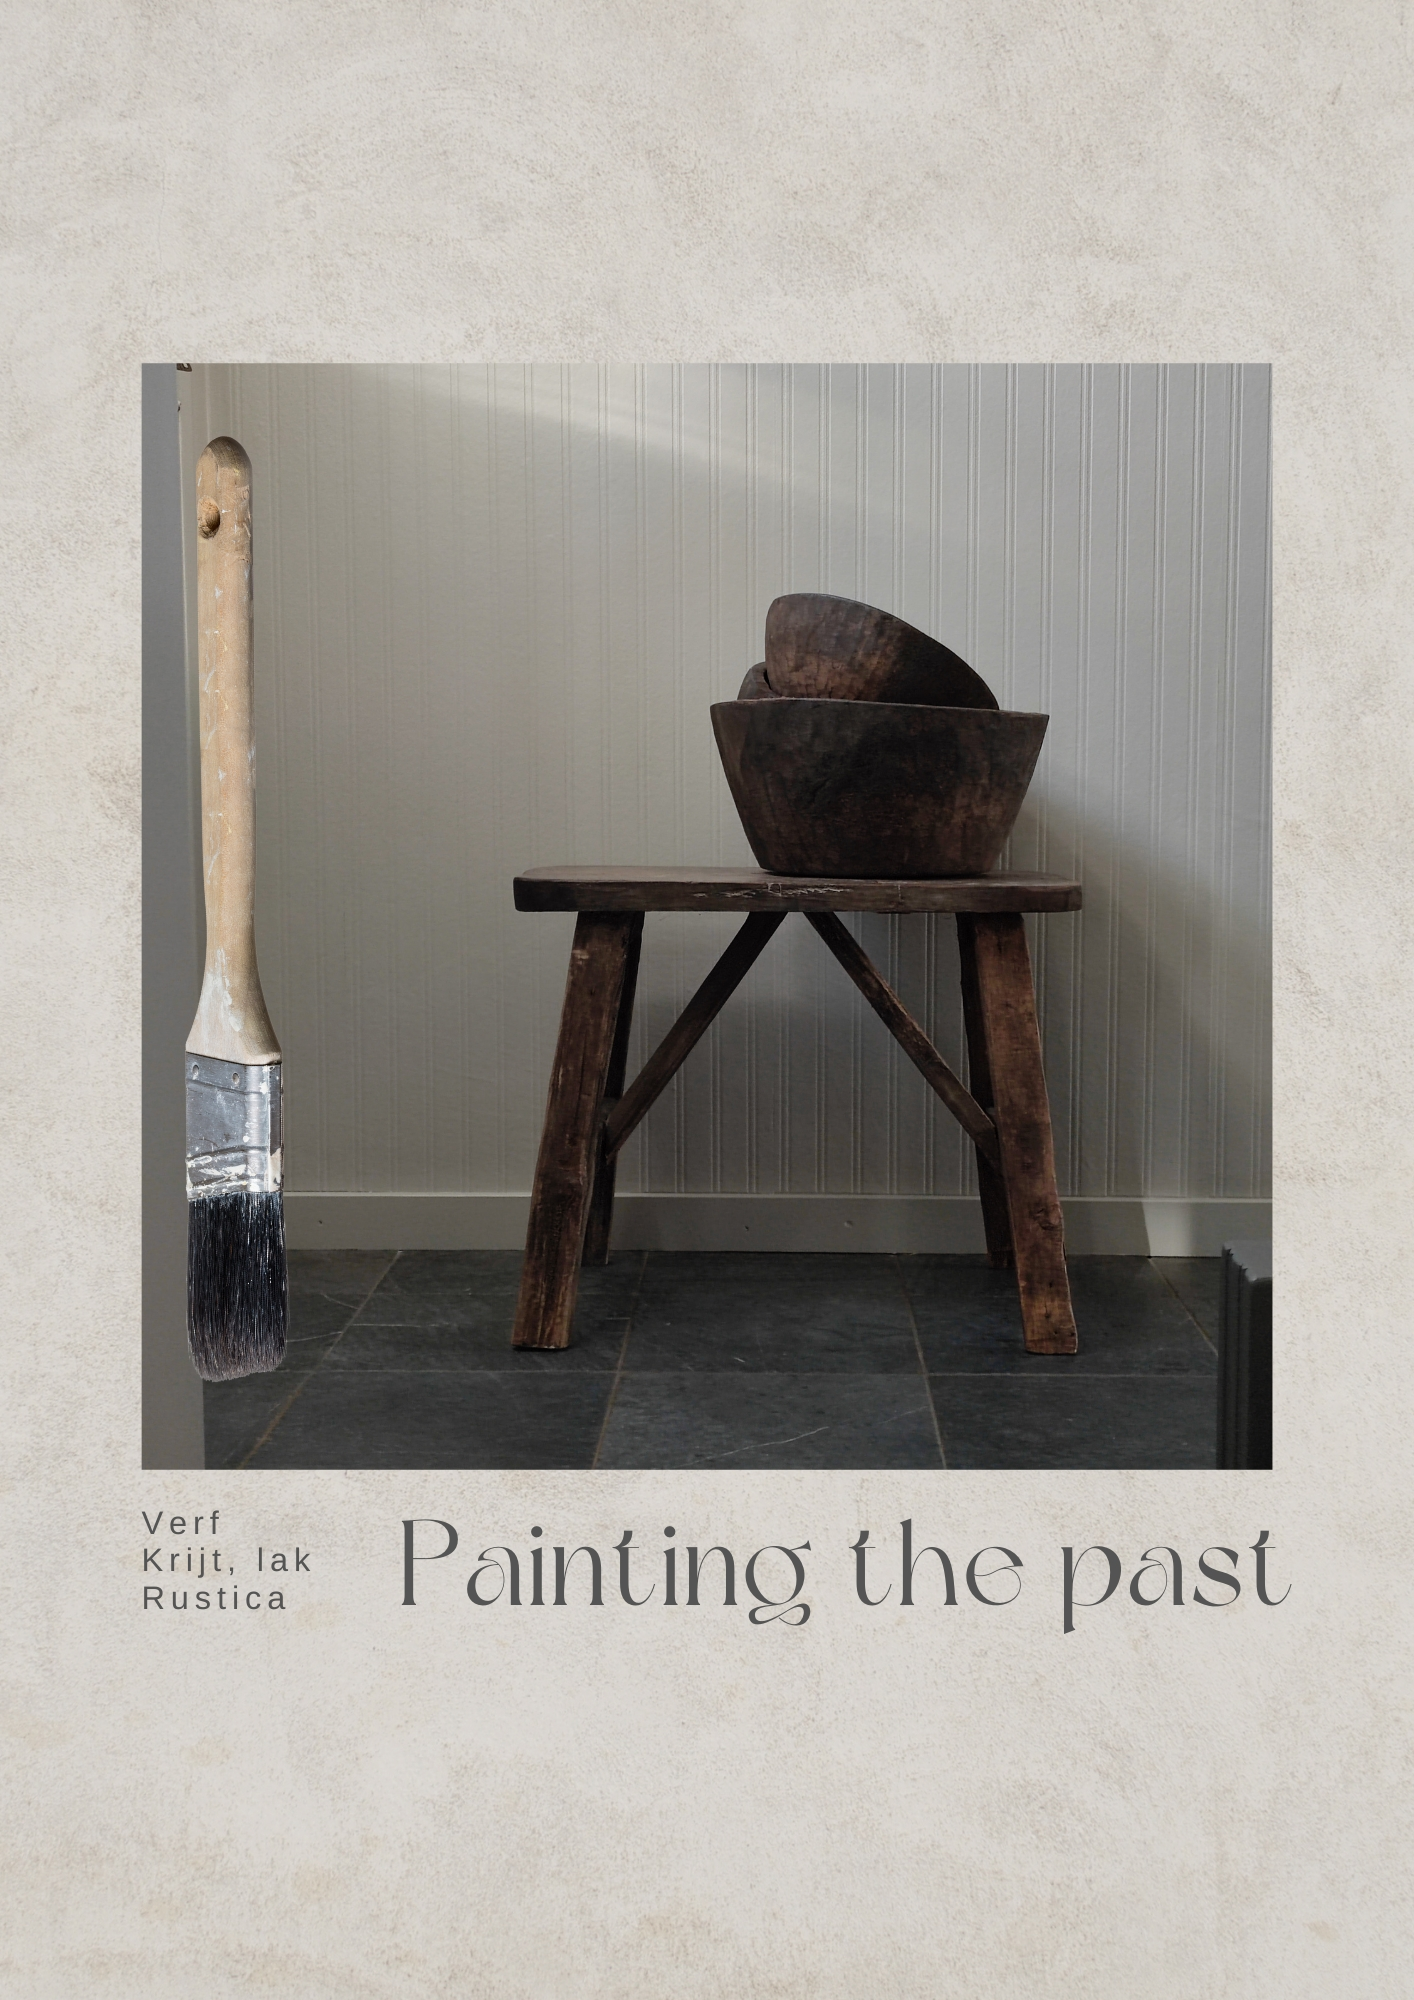 Painting the past